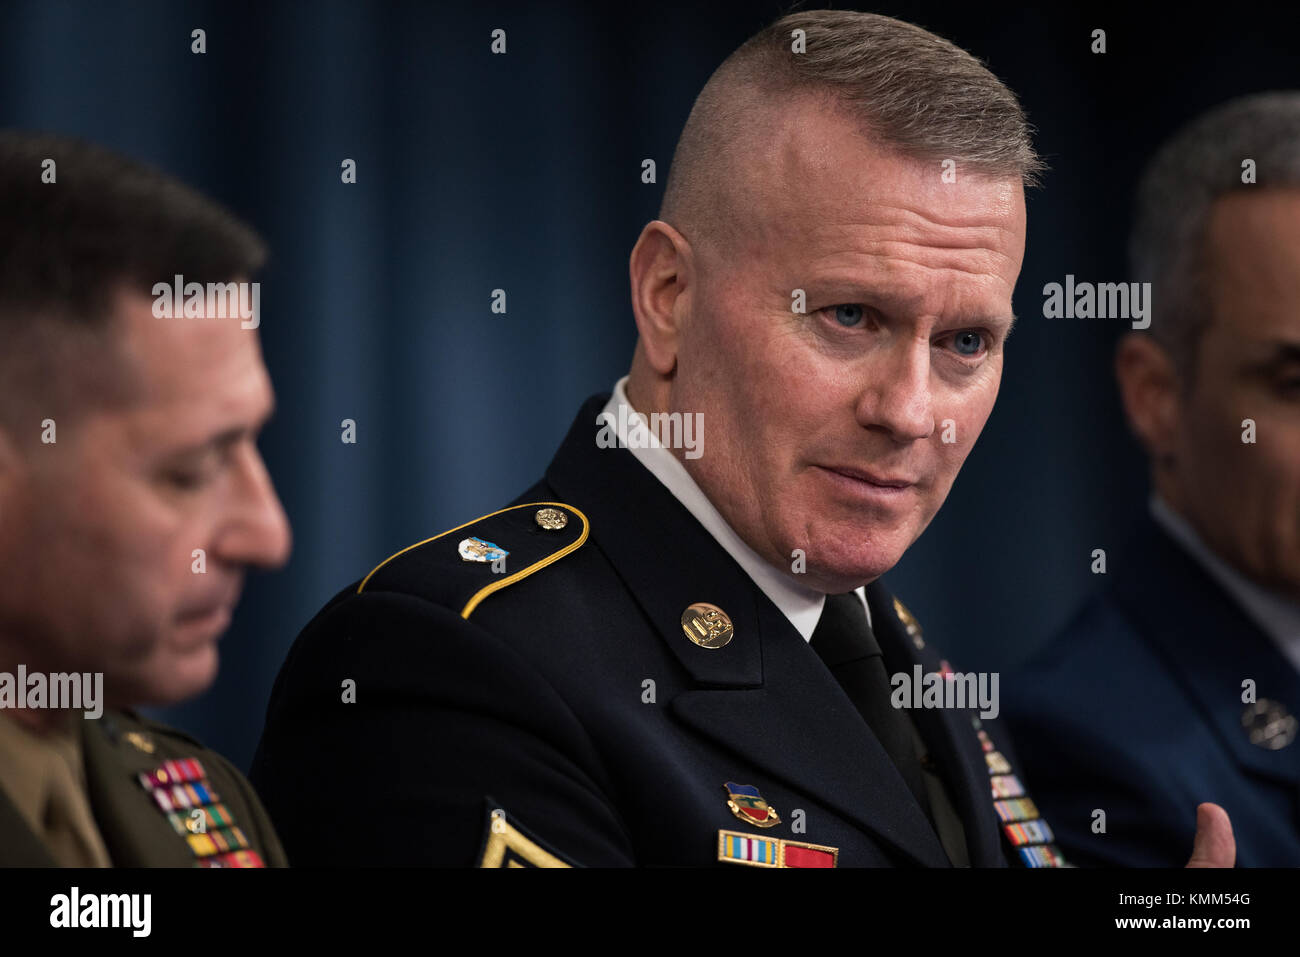 U.S. Joint Chiefs of Staff Chairman Senior Enlisted Advisor John Troxell speaks to the media at the Pentagon Press Briefing Room November 28, 2017 in Washington, DC.  (photo by Amber I. Smith via Planetpix) Stock Photo